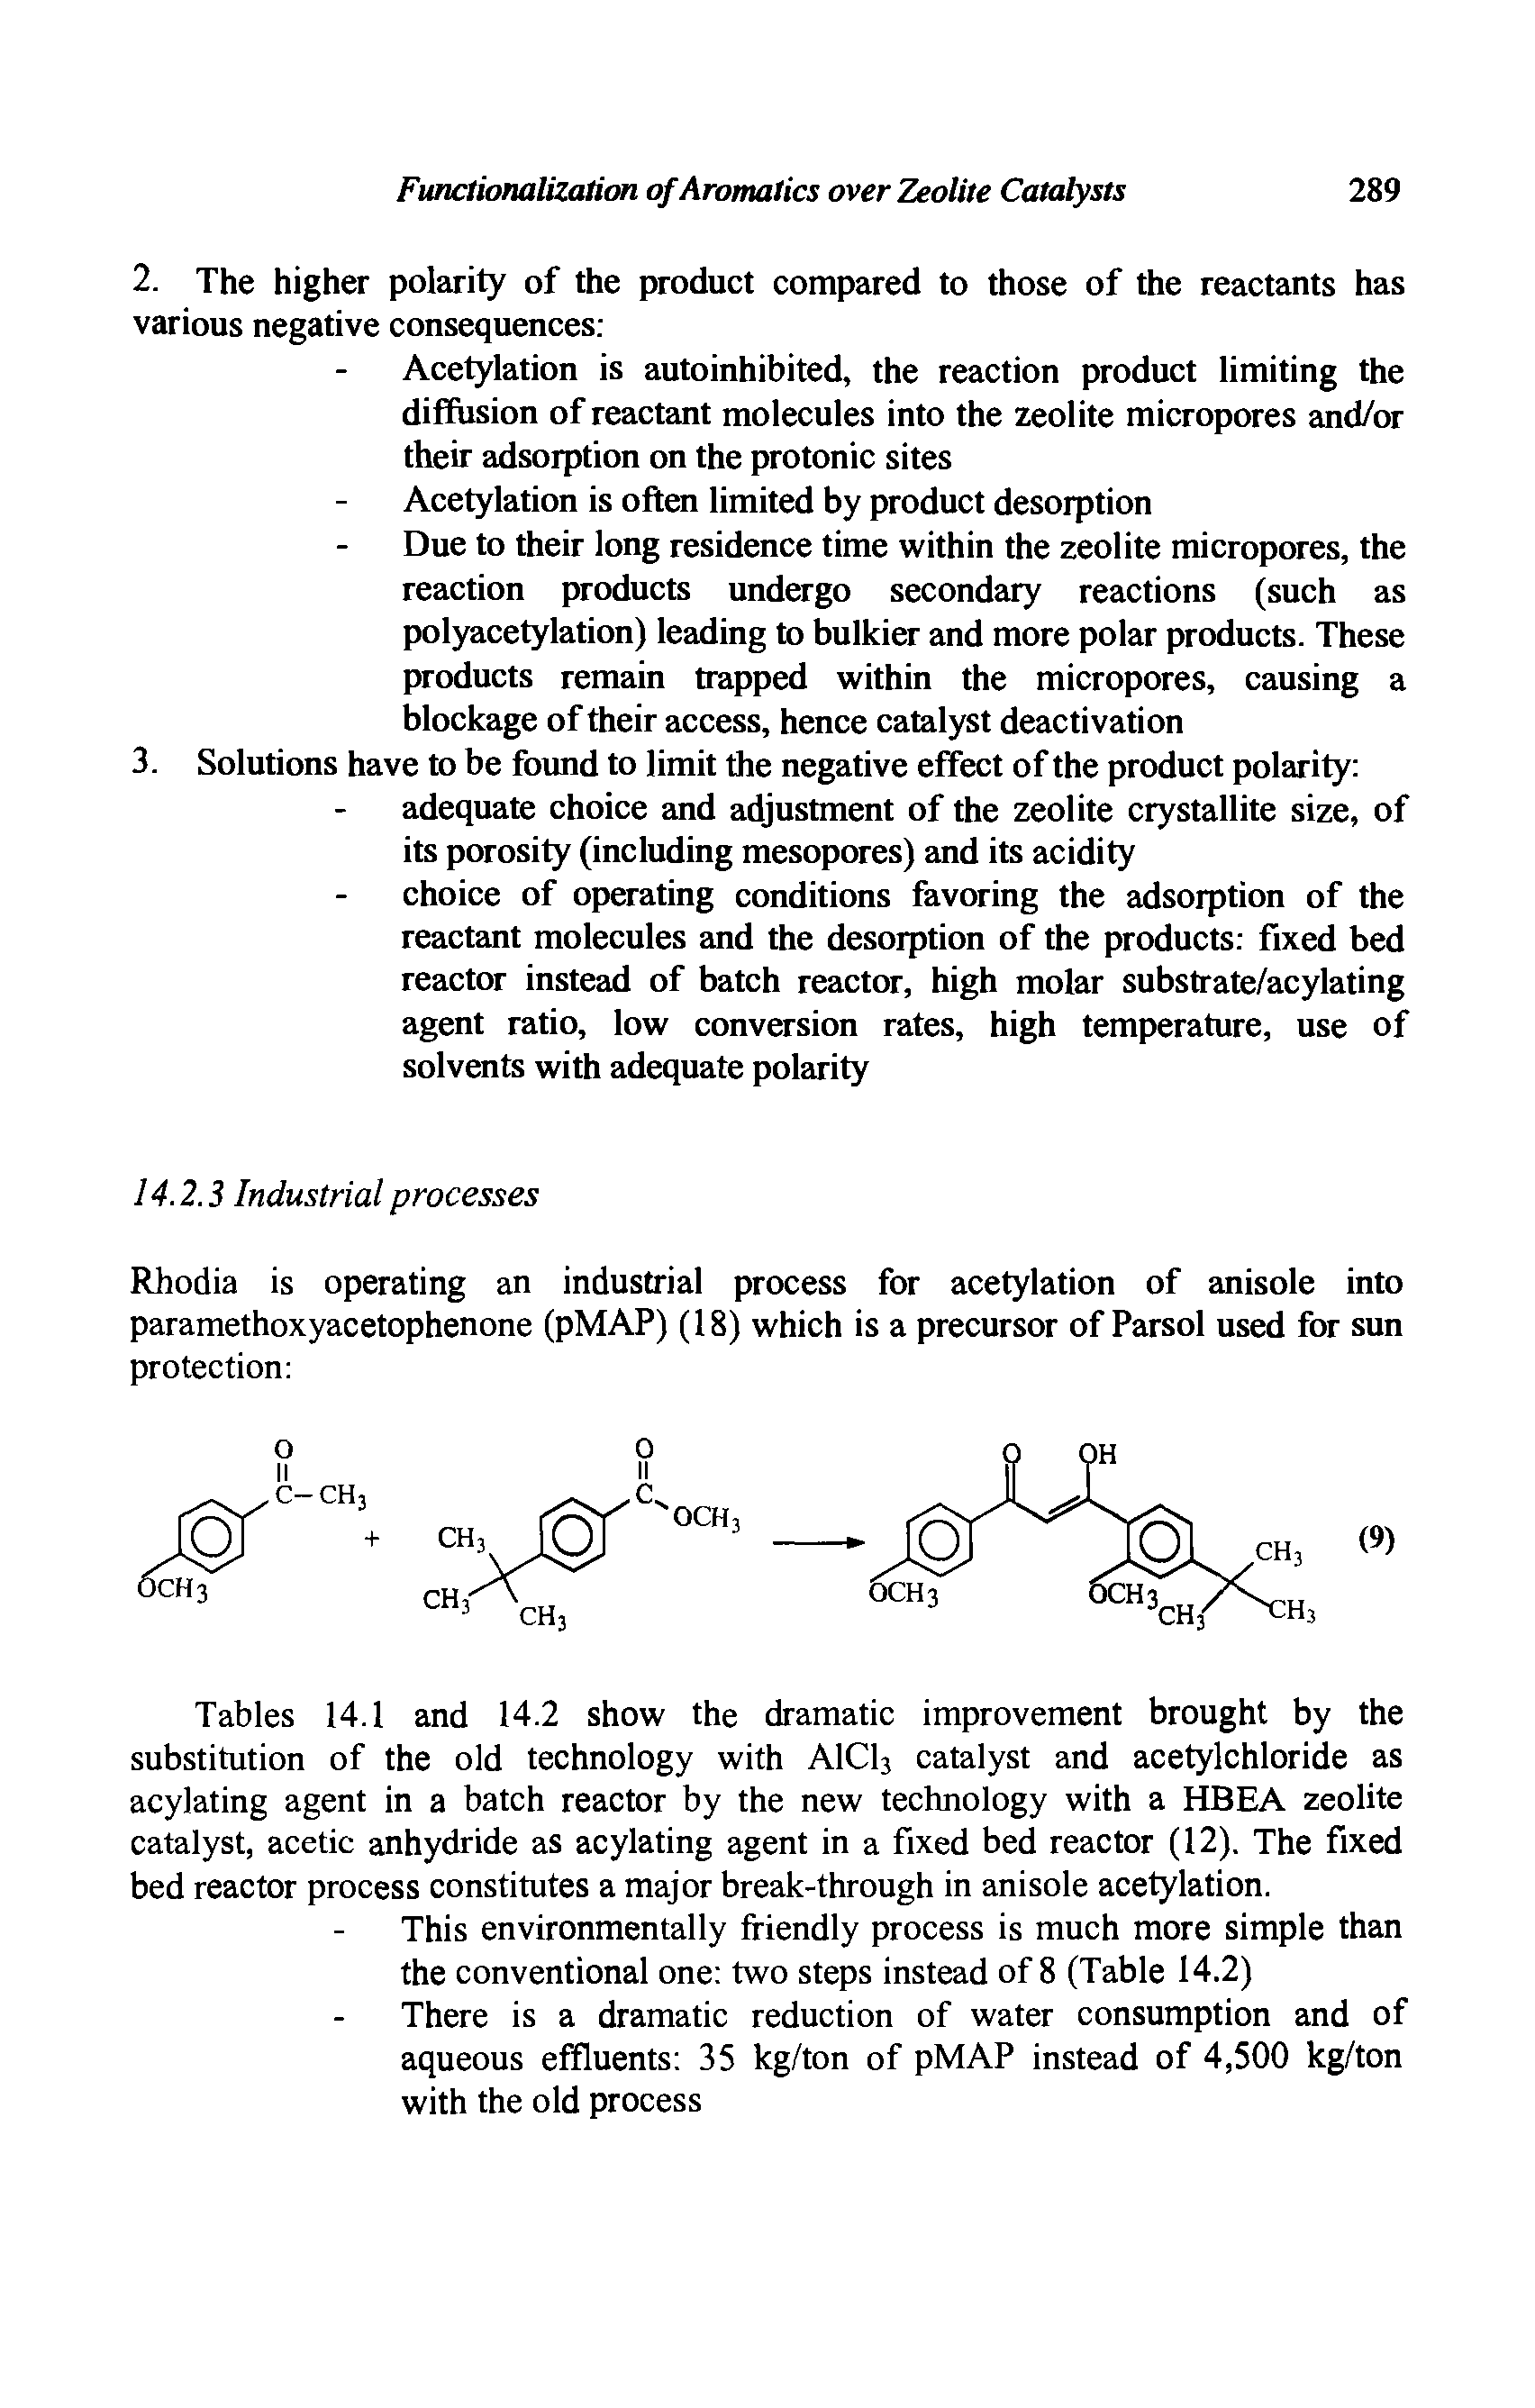 Tables 14.1 and 14.2 show the dramatic improvement brought by the substitution of the old technology with AICI3 catalyst and acetylchloride as acylating agent in a batch reactor by the new technology with a HBEA zeolite catalyst, acetic anhydride as acylating agent in a fixed bed reactor (12). The fixed bed reactor process constitutes a major break-through in anisole acetylation.